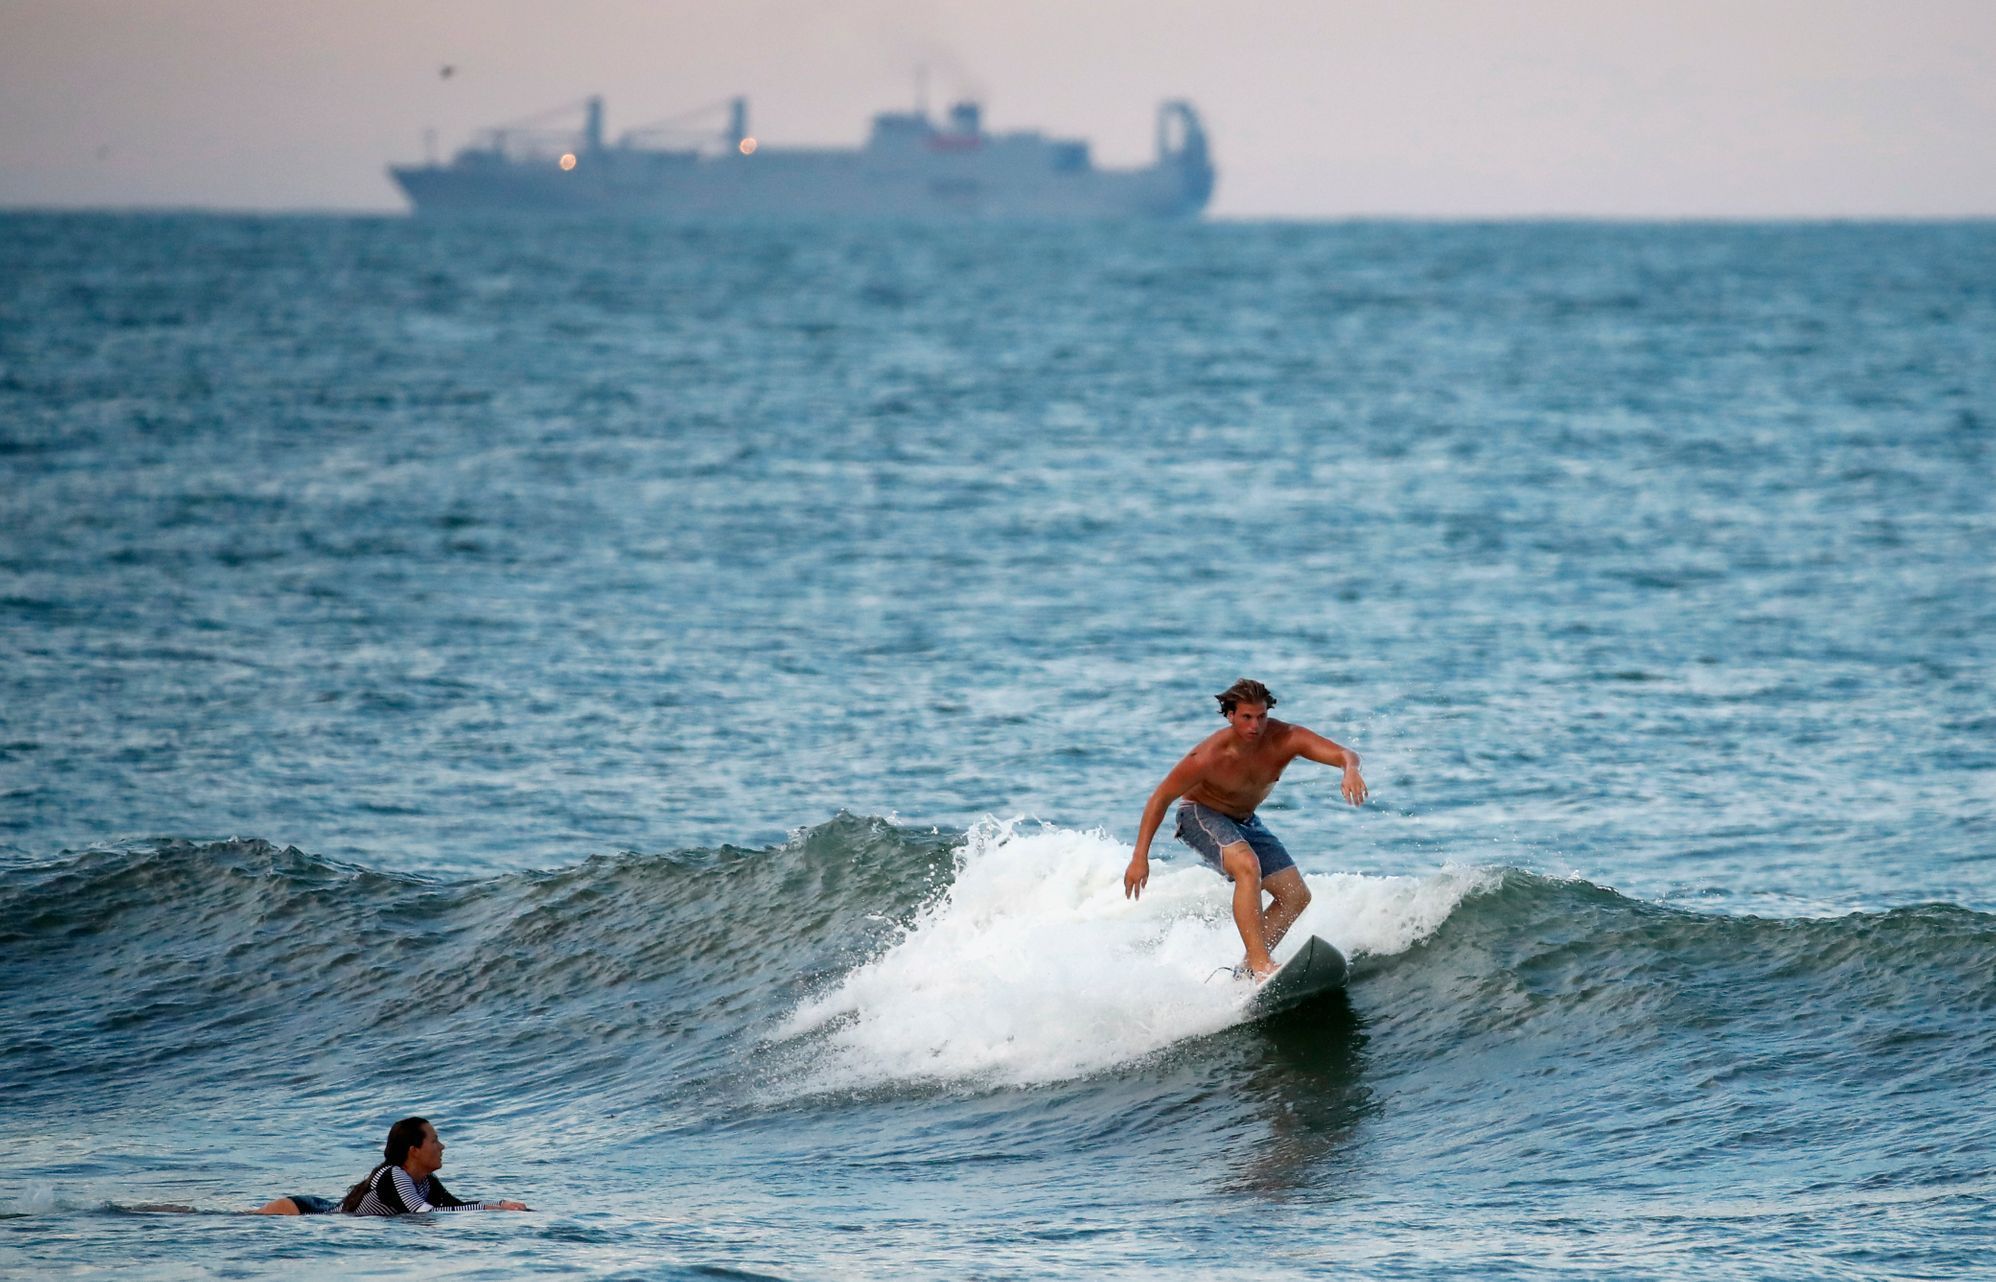 A surfer catches a wave with a navy ship behind him, Tuesday, Sept. 11, 2018, in Virginia Beach, Va., before the arrival of Hurricane Florence.